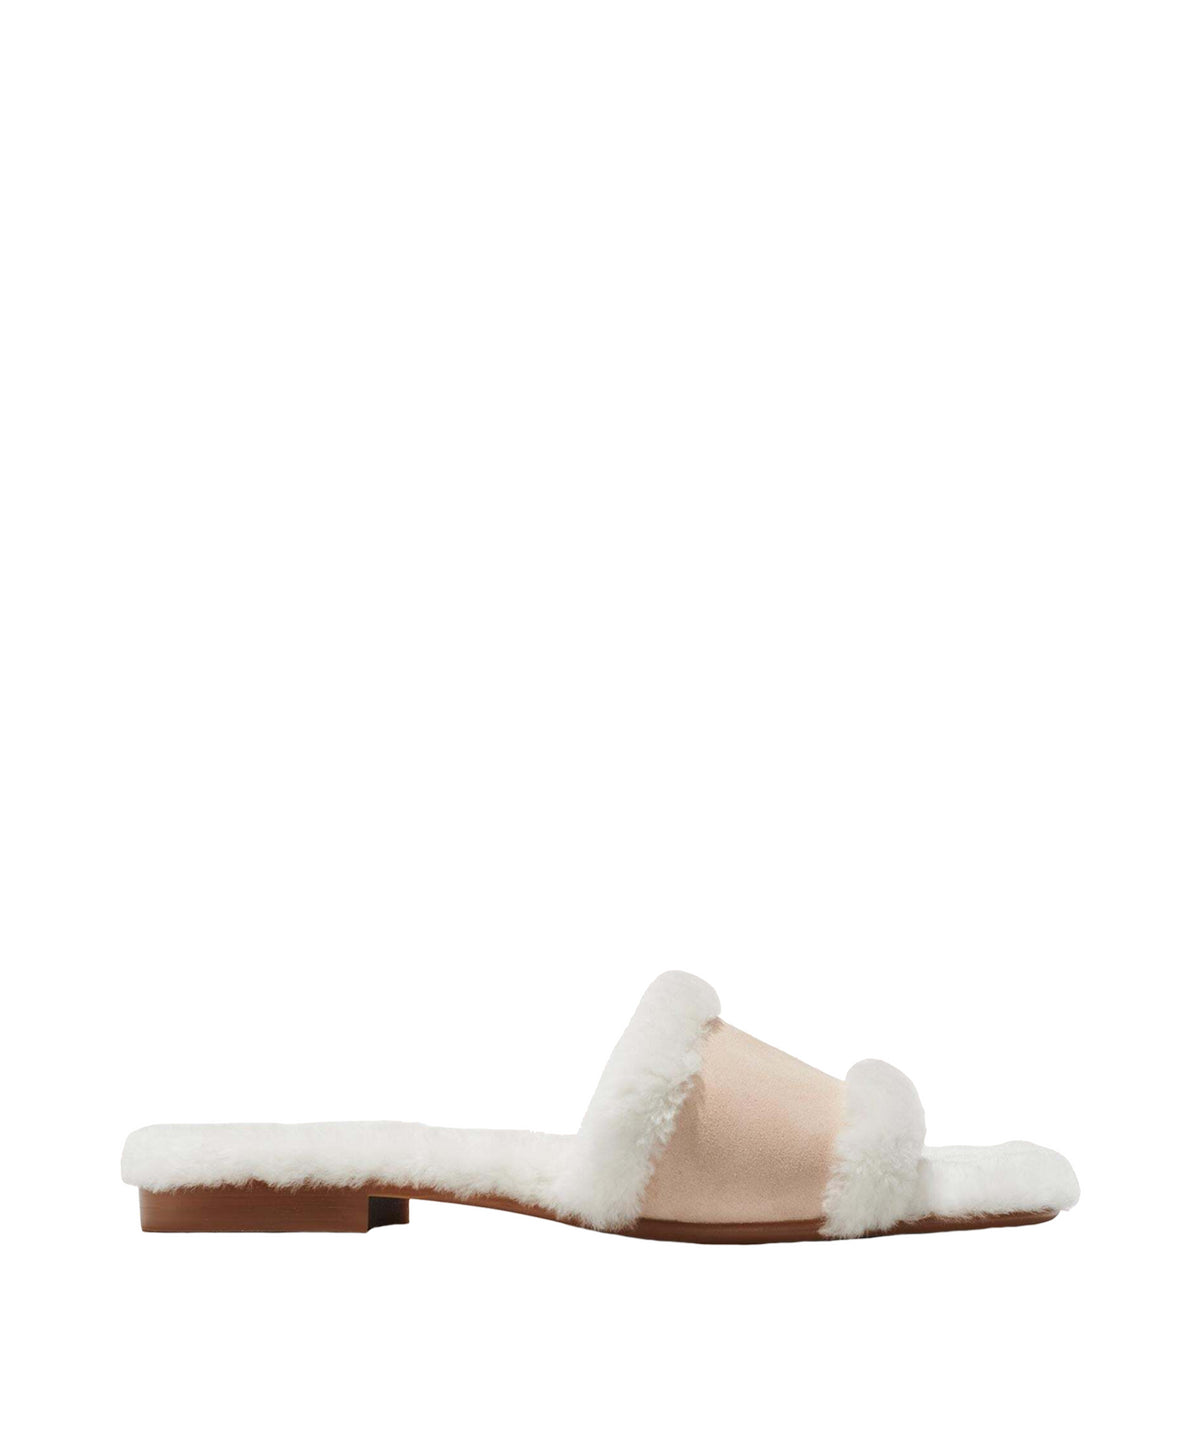 The Shearling Slide in Natural